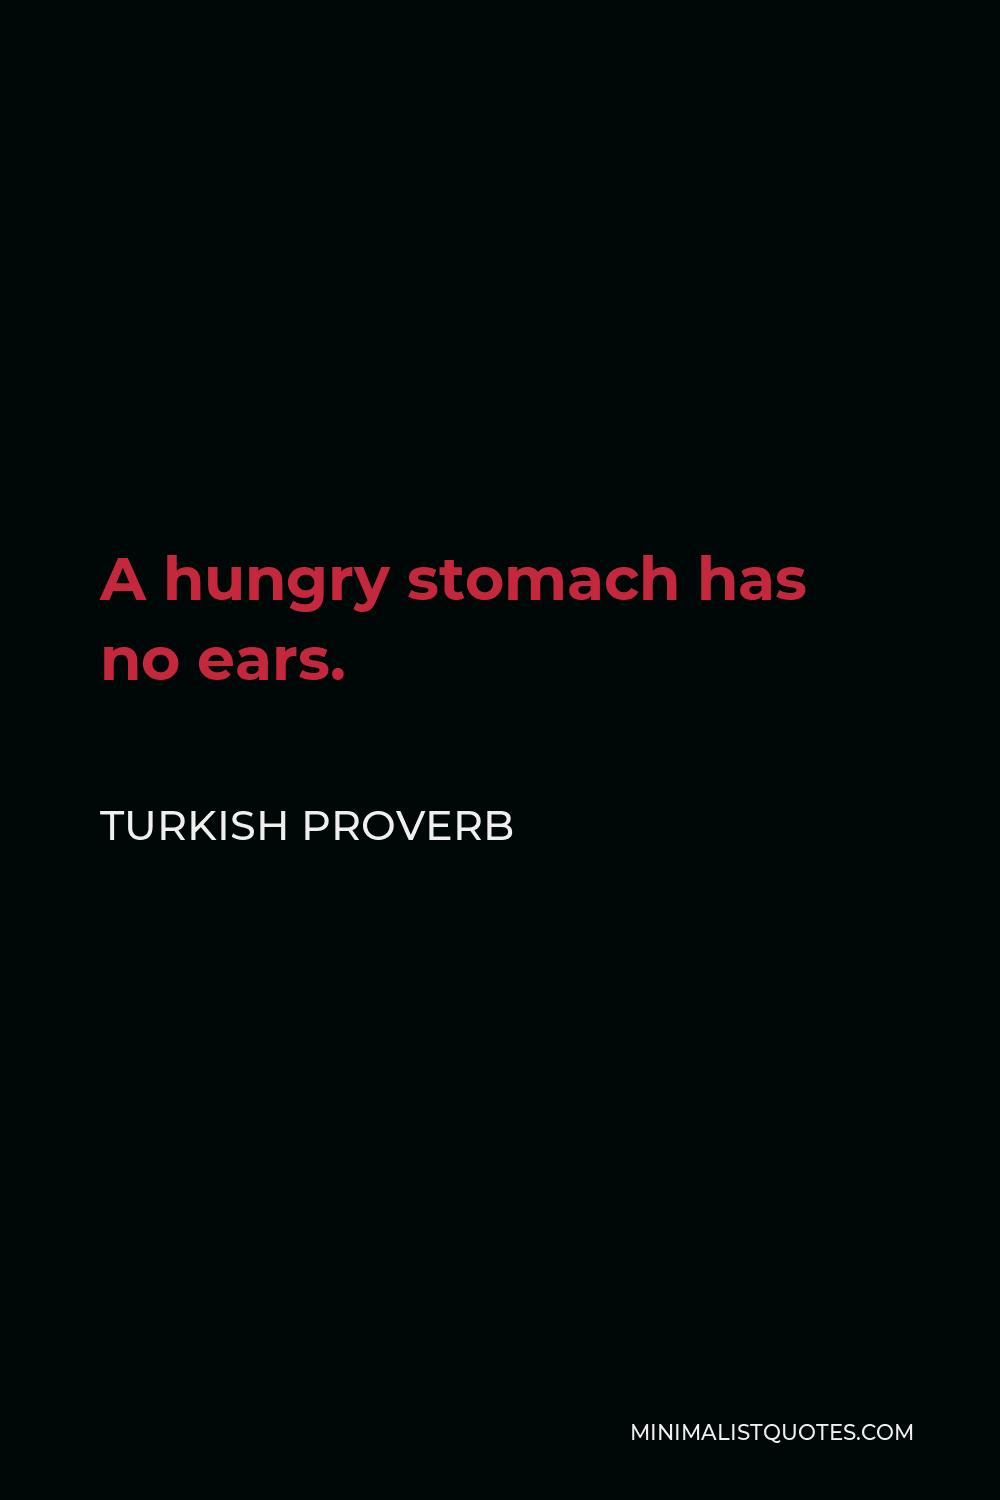 Turkish Proverb Quote - A hungry stomach has no ears.